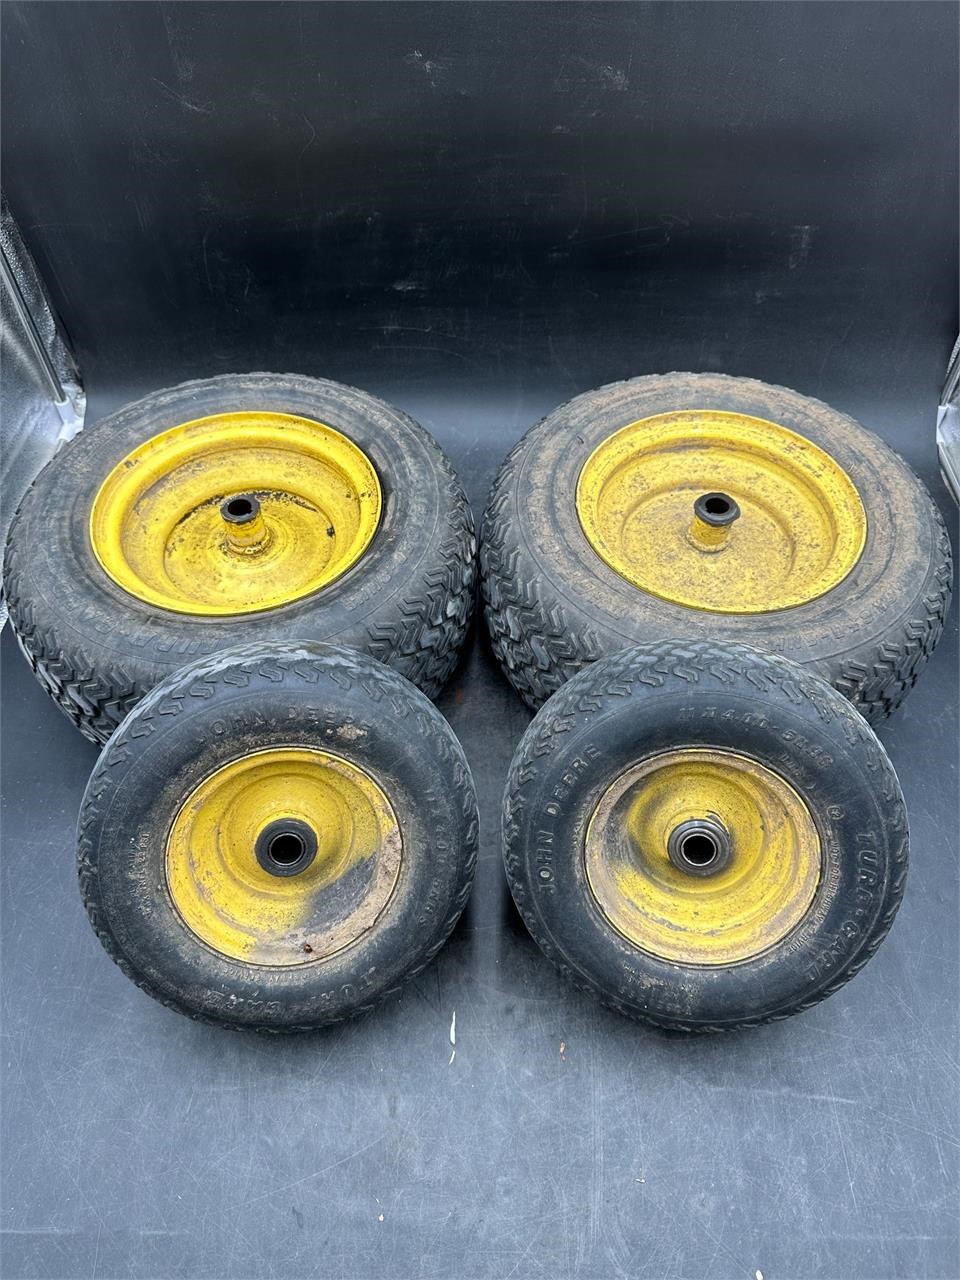 John Deere Tires & Rims from a Riding Lawn Mower